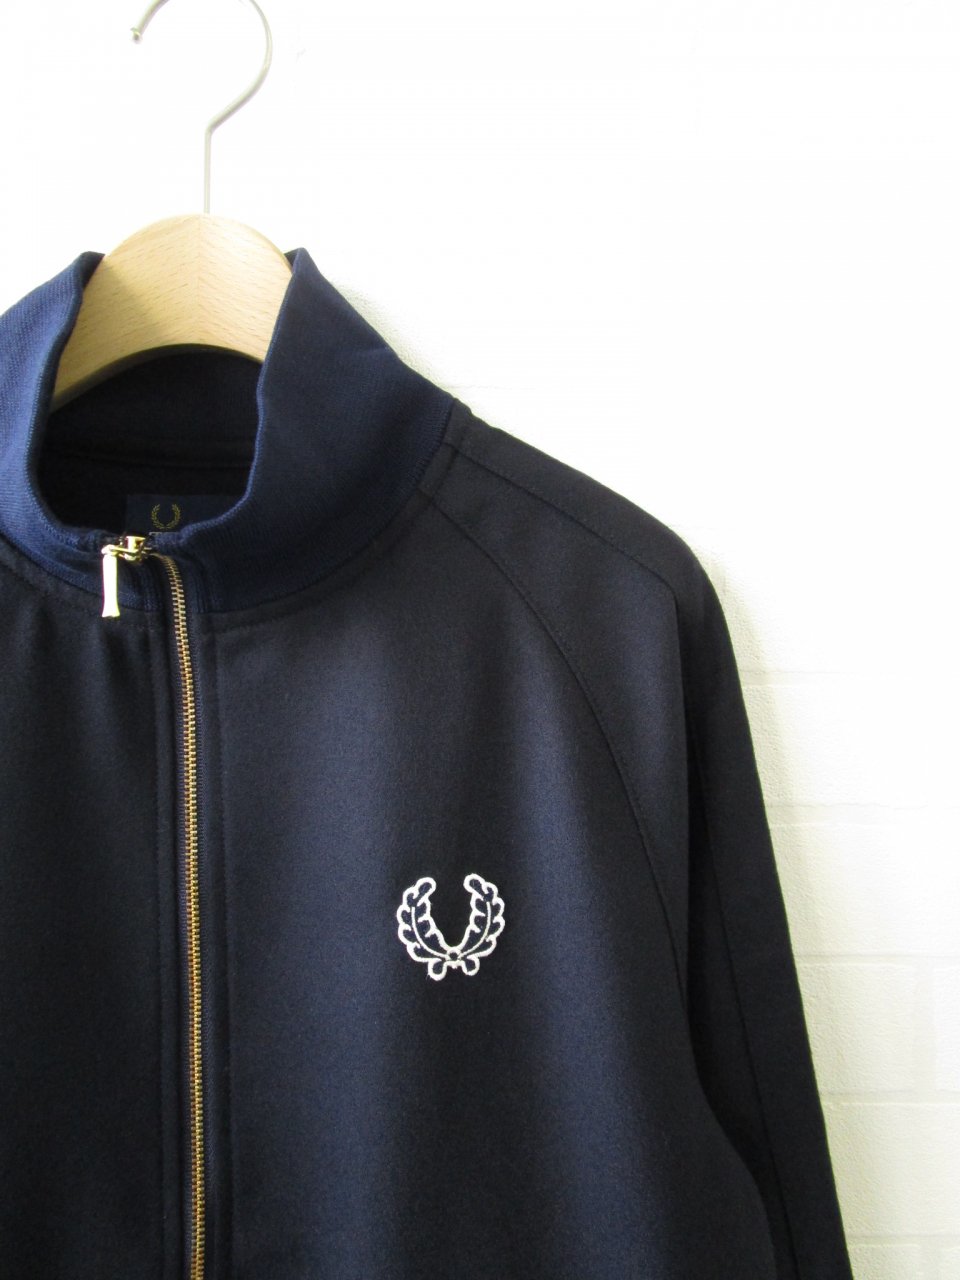 FRED PERRY - トラックジャケット - Sheth Online Store - シス 